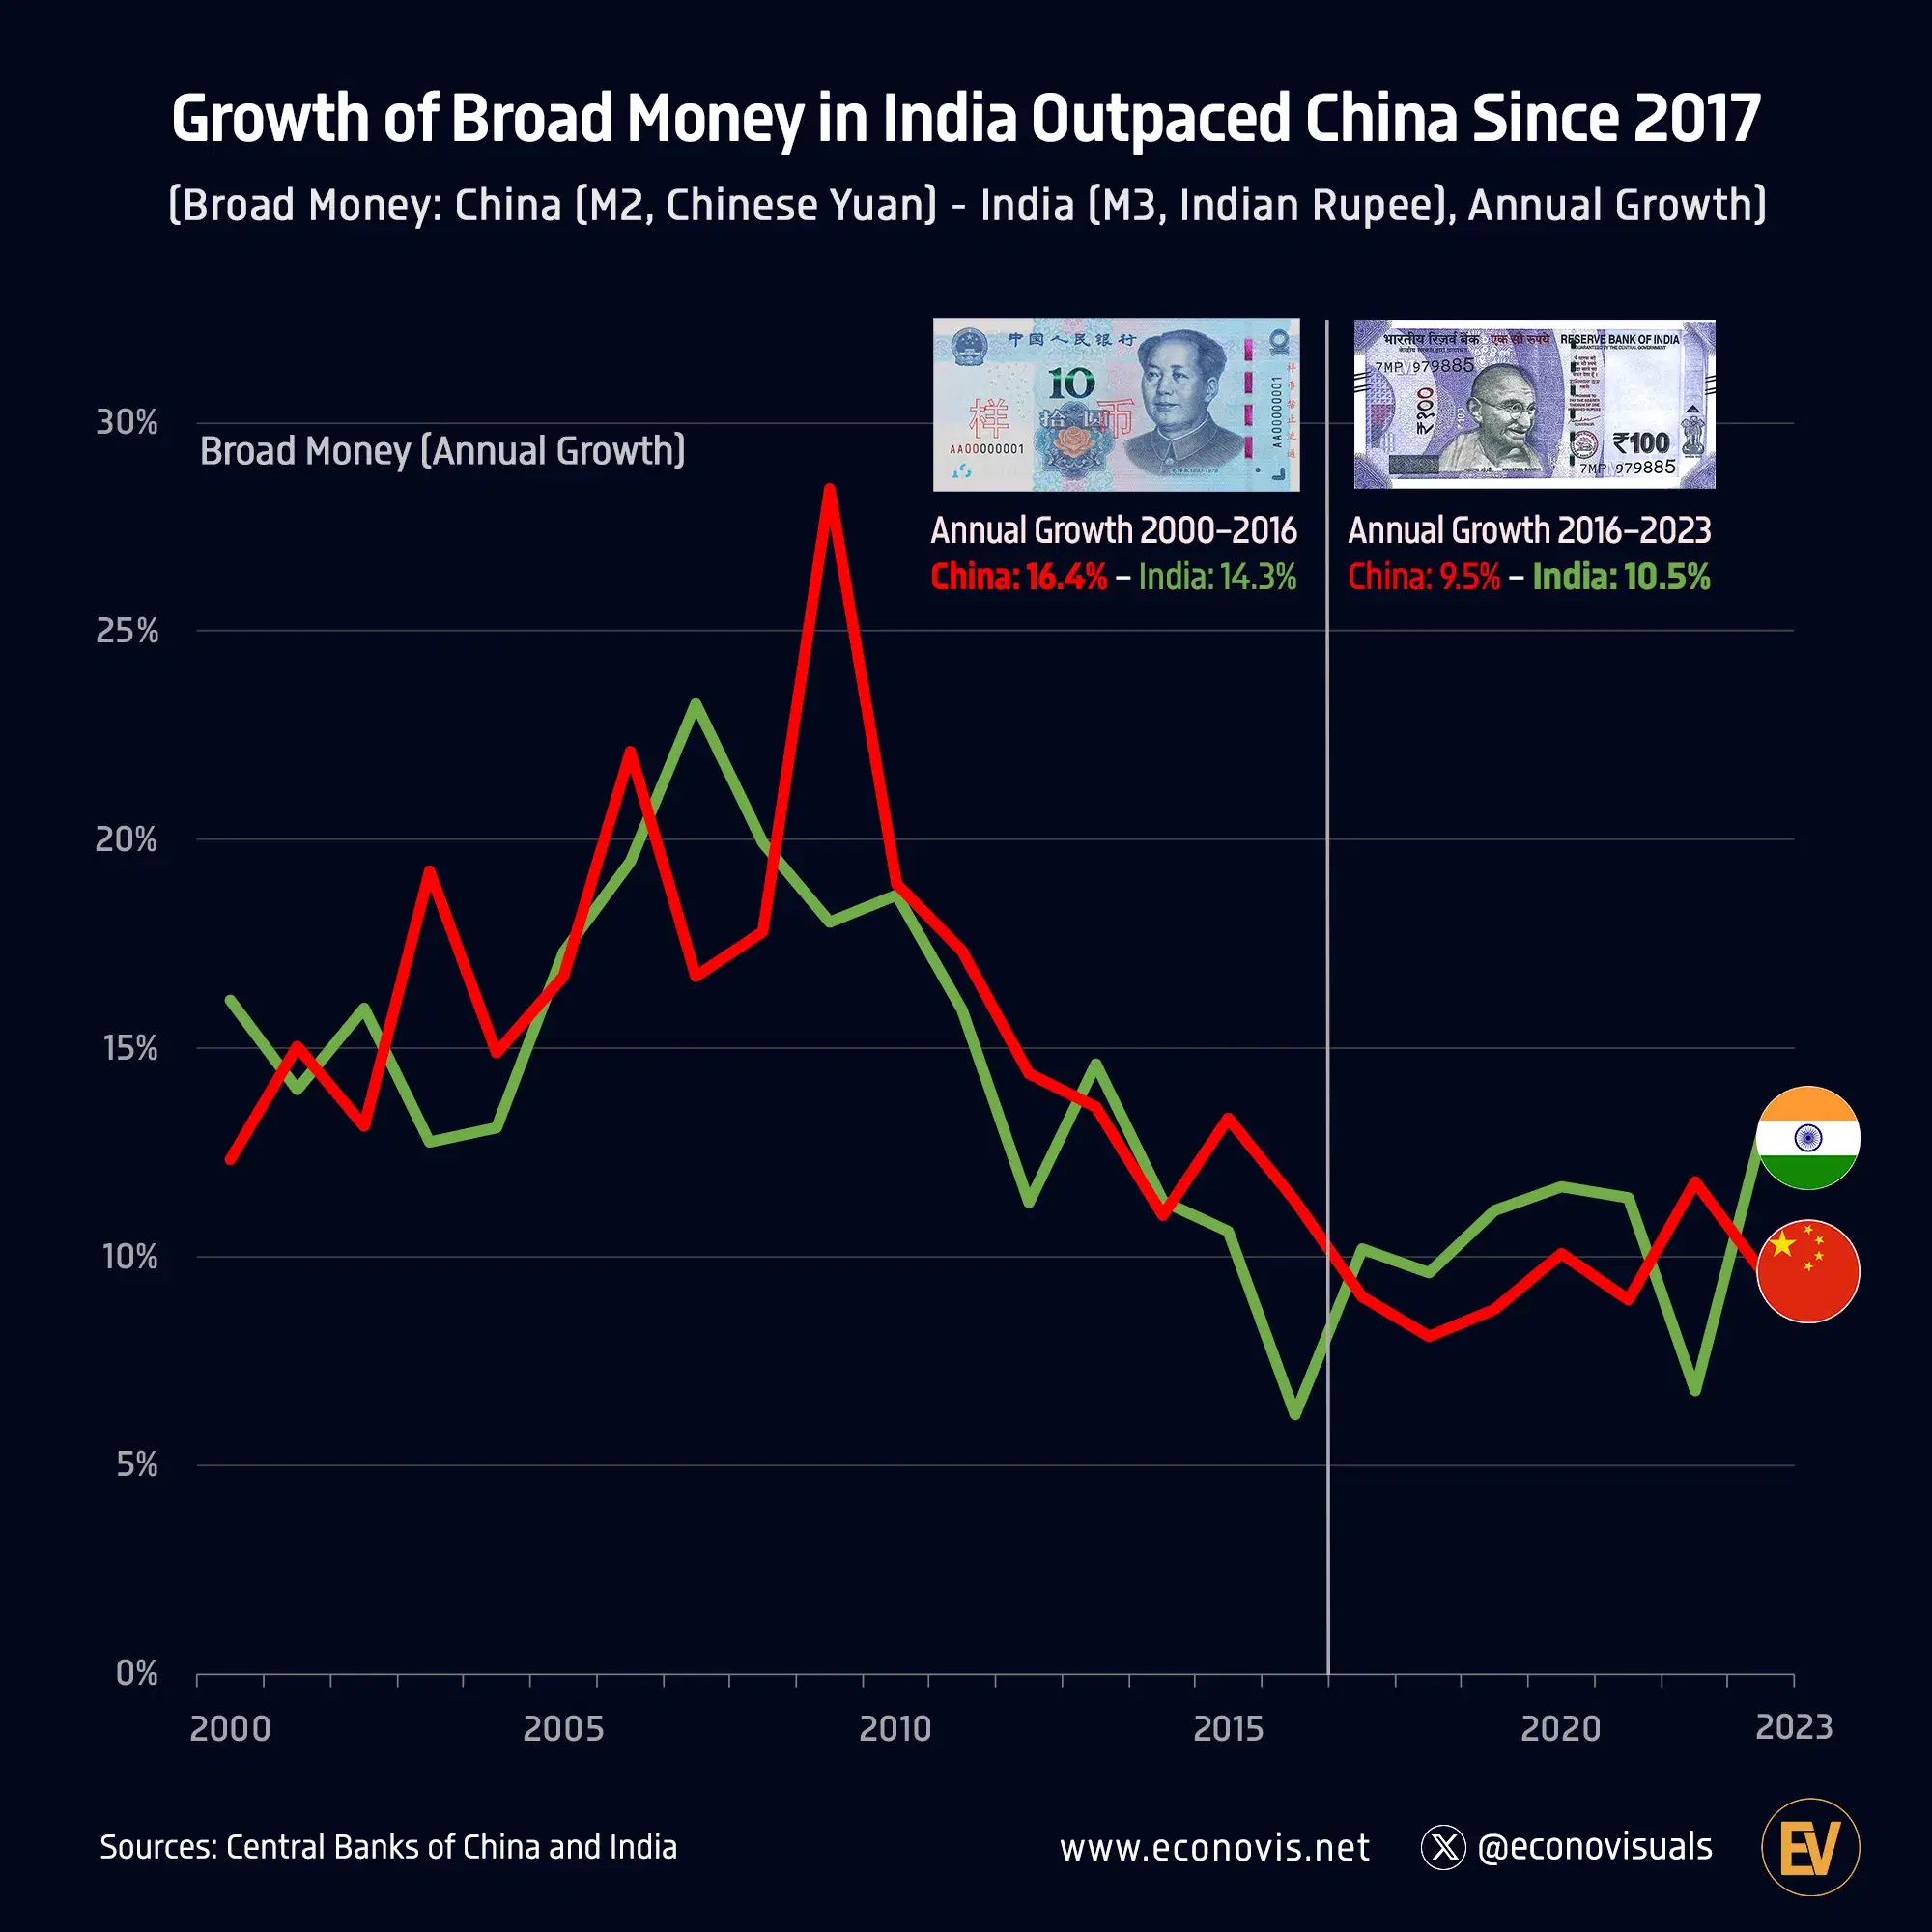 Growth of Broad Money in India Outpaced China Since 2017